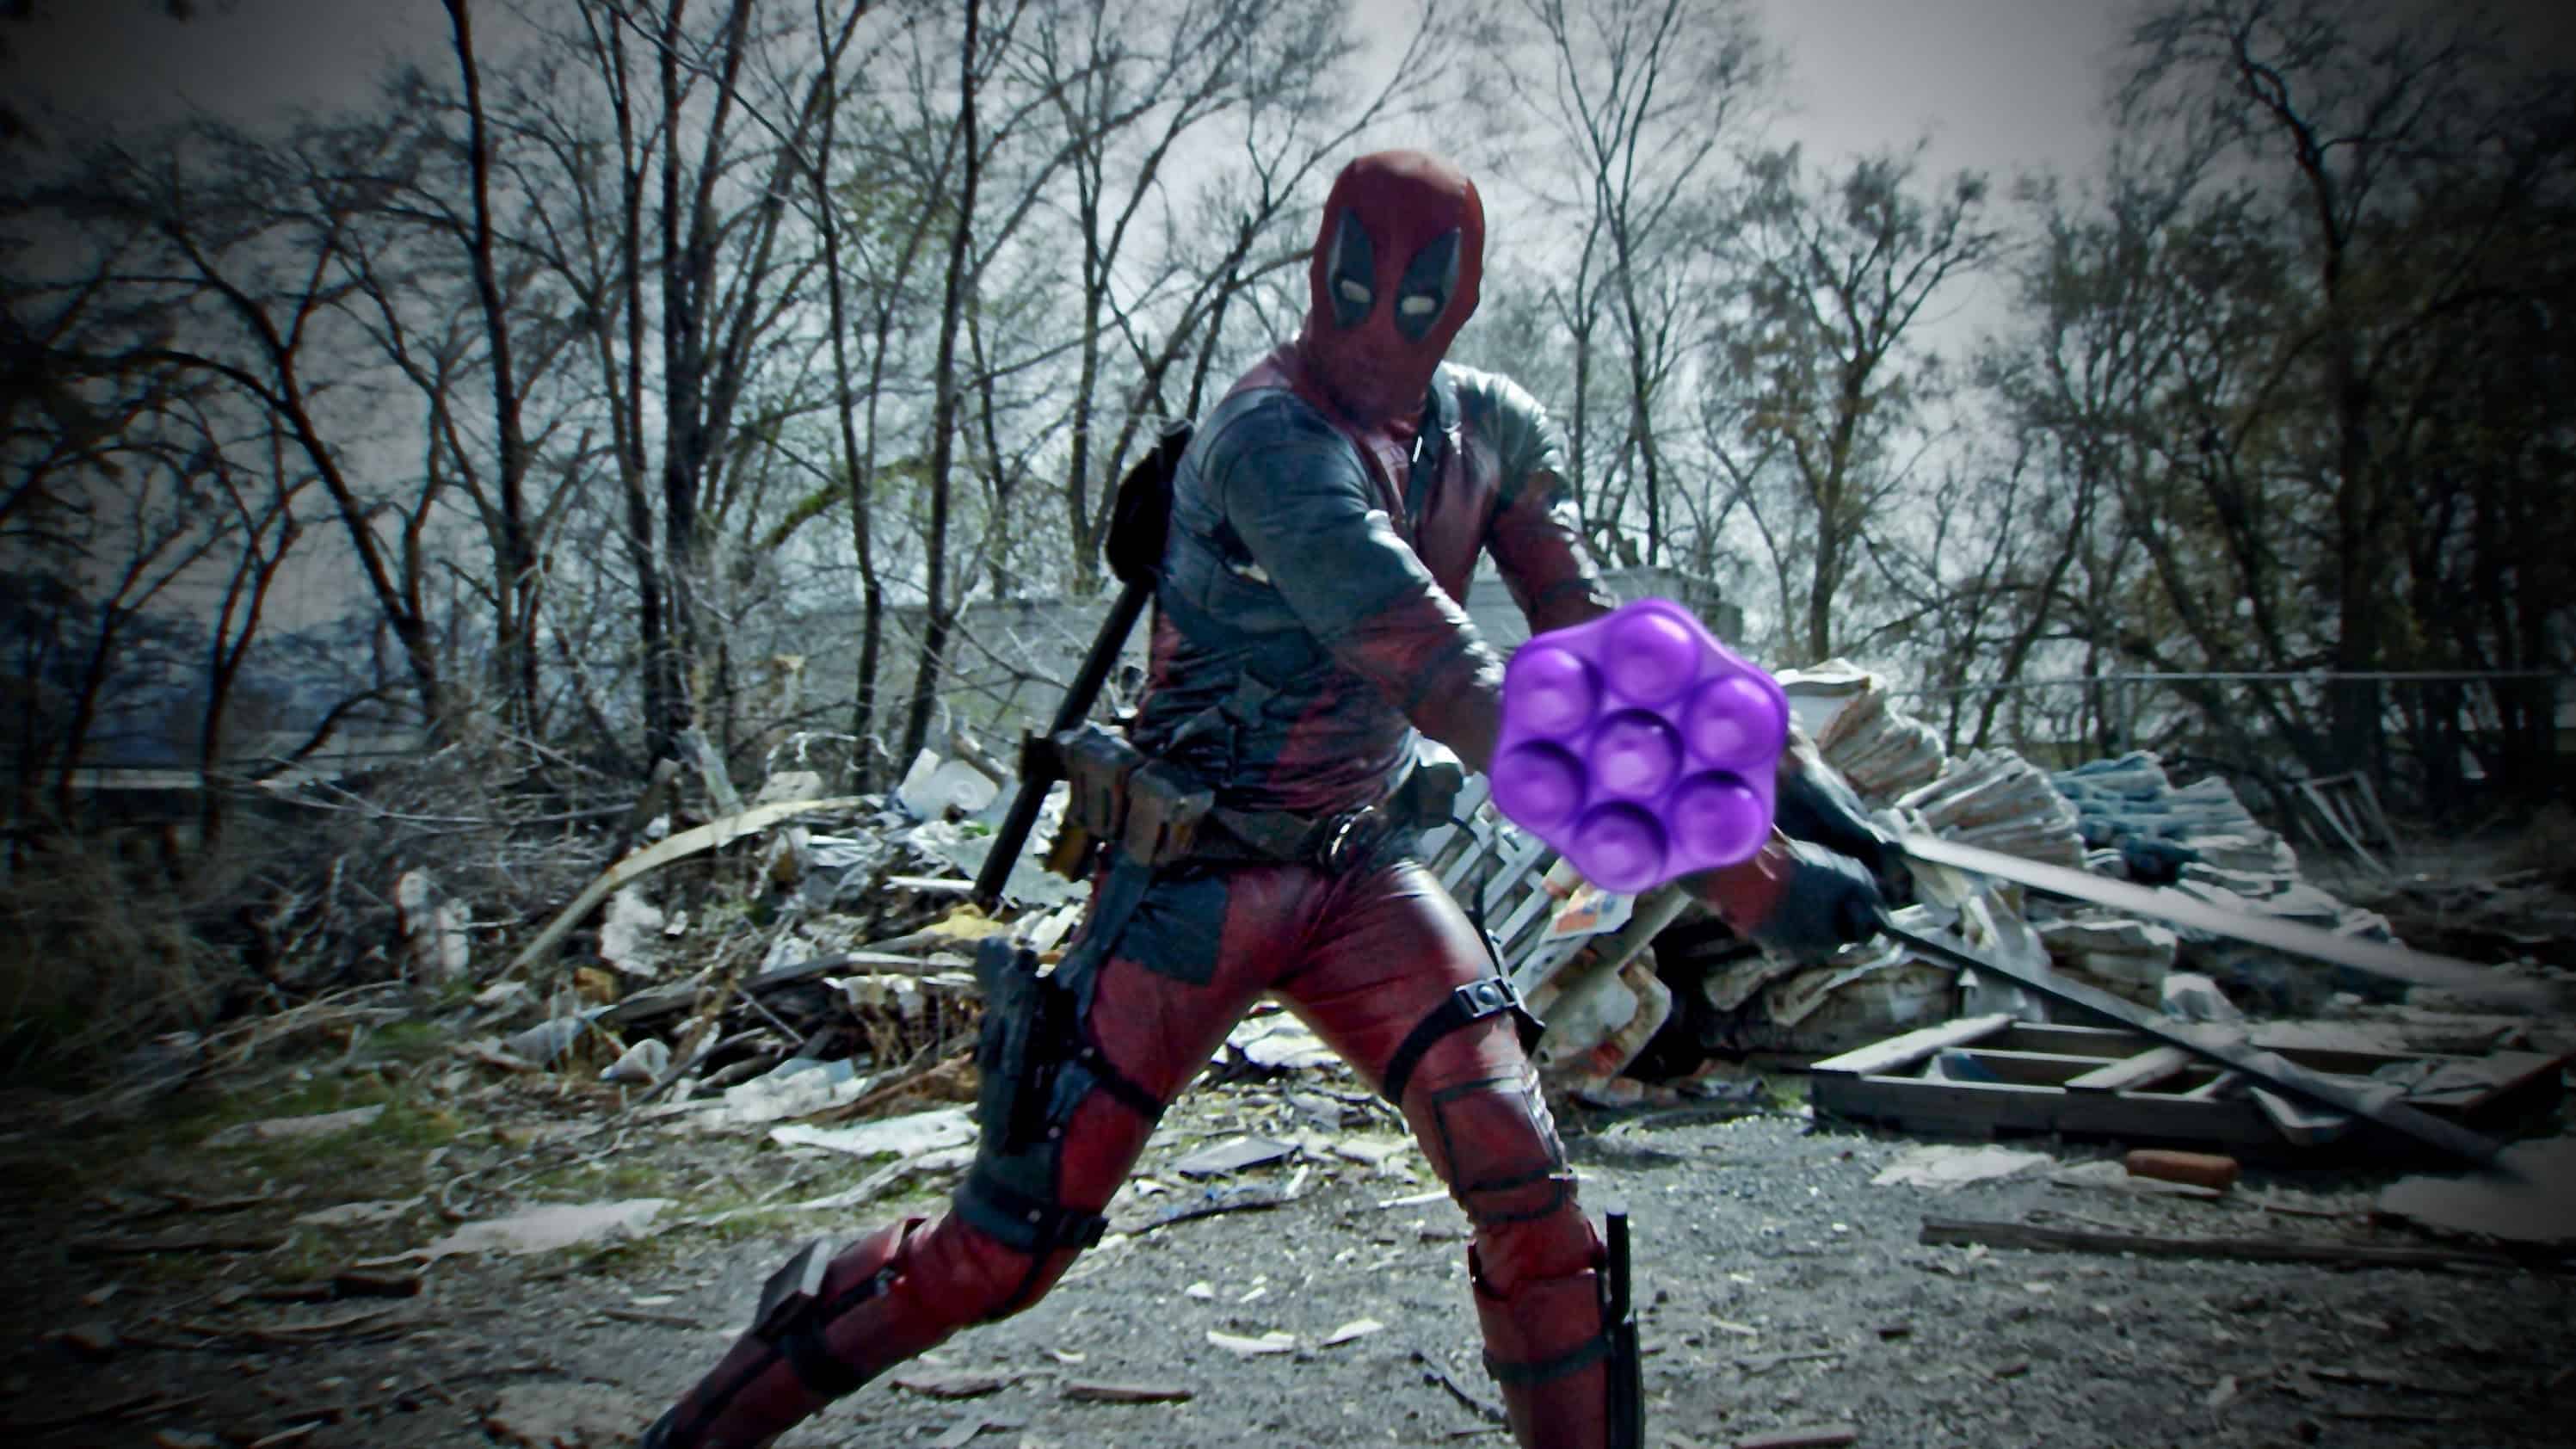 Deadpool vs Candy Crush in Real Life